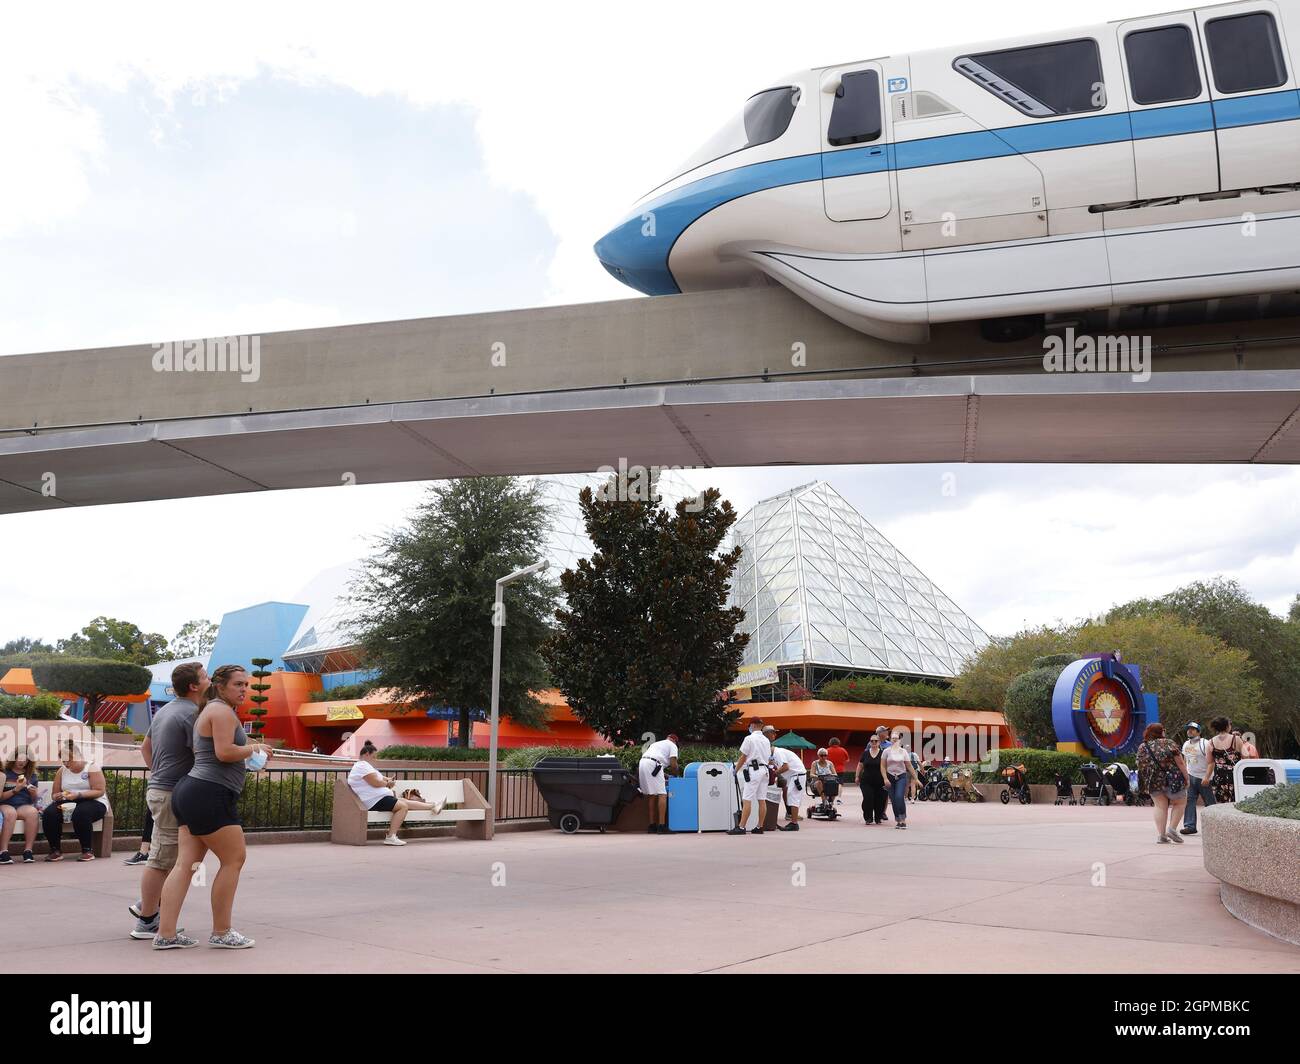 Orlando, United States. 29th Sep, 2021. The Walt Disney World Monorail System passes through Epcot theme park during 'The World's Most Magical Celebration' - the 50th anniversary of Walt Disney World Resort! on Wednesday, September 29, 2021 in Orlando, Florida. Photo by John Angelillo/UPI Credit: UPI/Alamy Live News Stock Photo